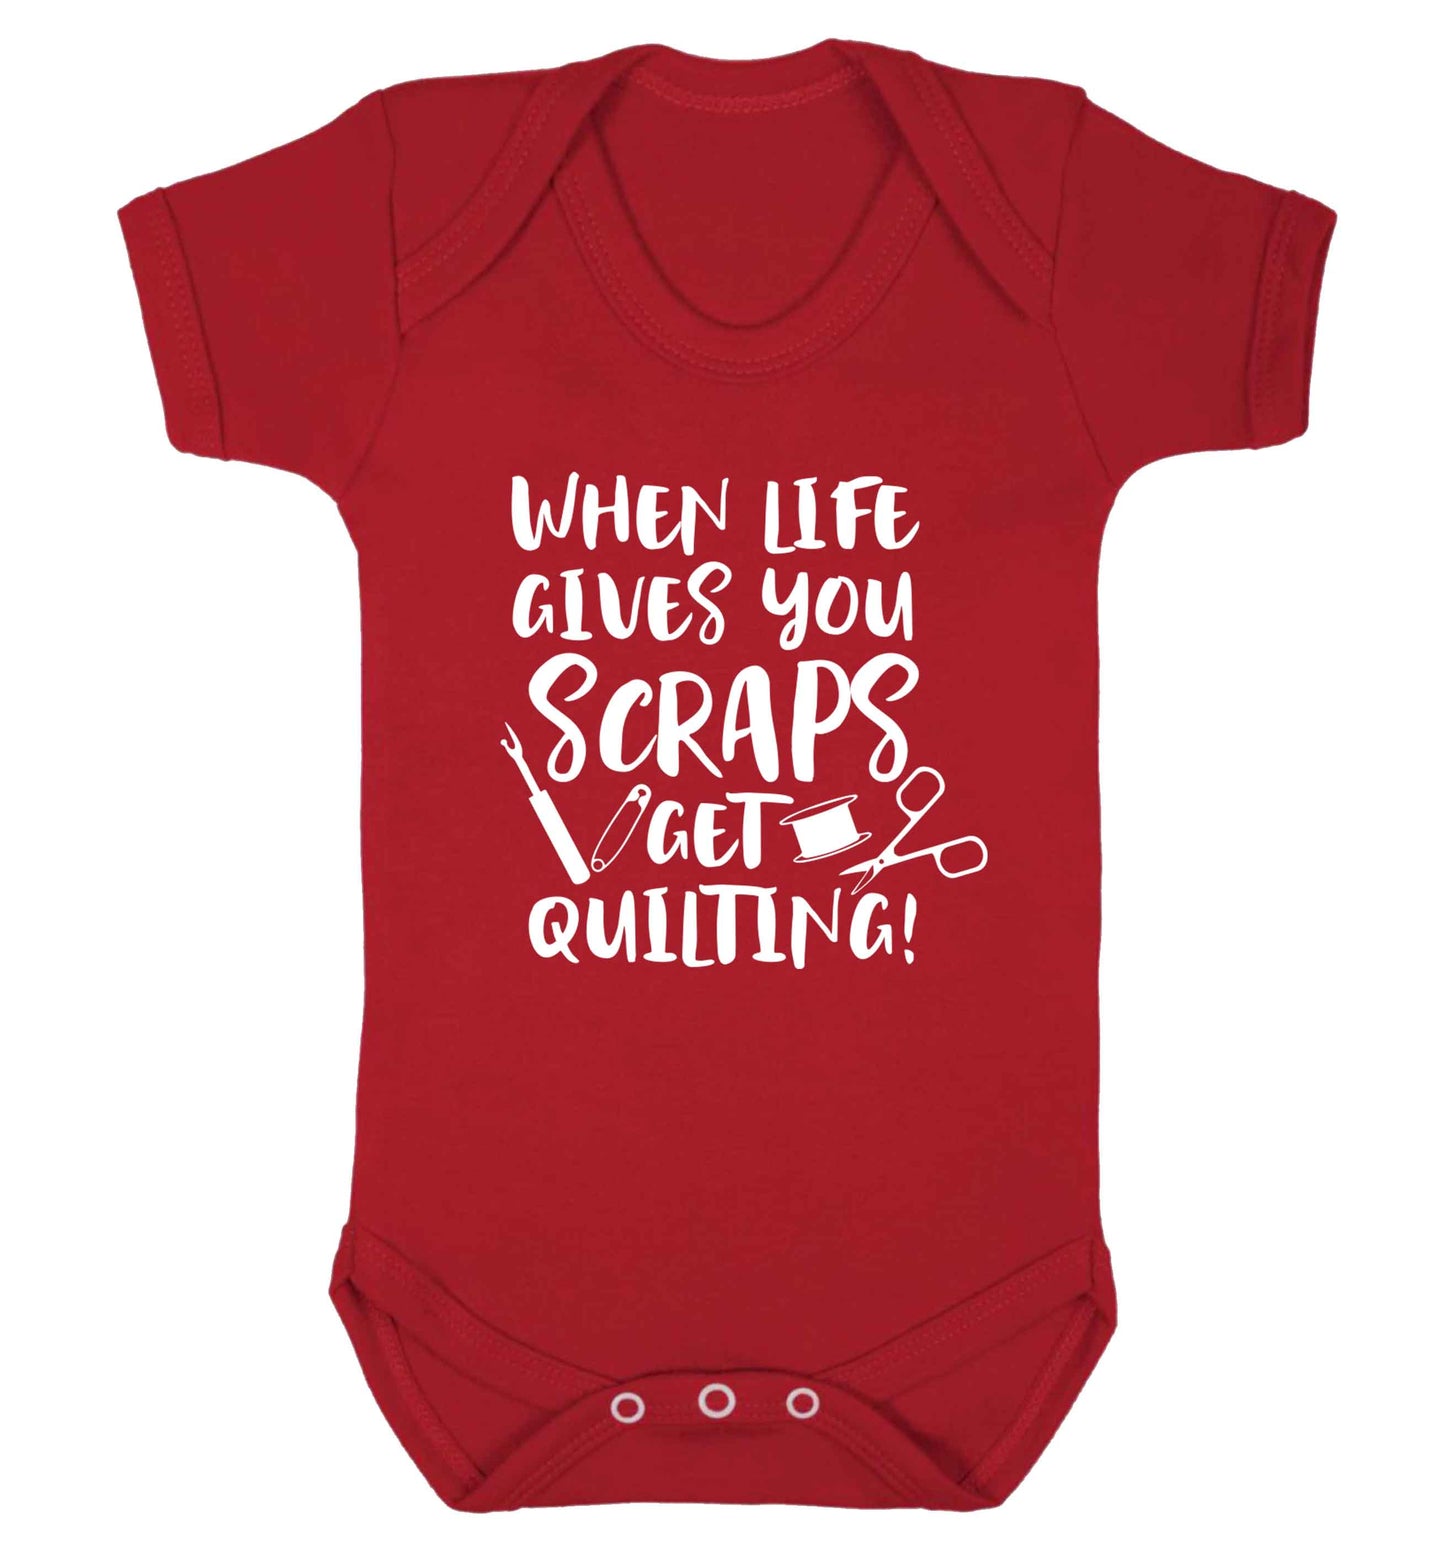 When life gives you scraps get quilting! Baby Vest red 18-24 months